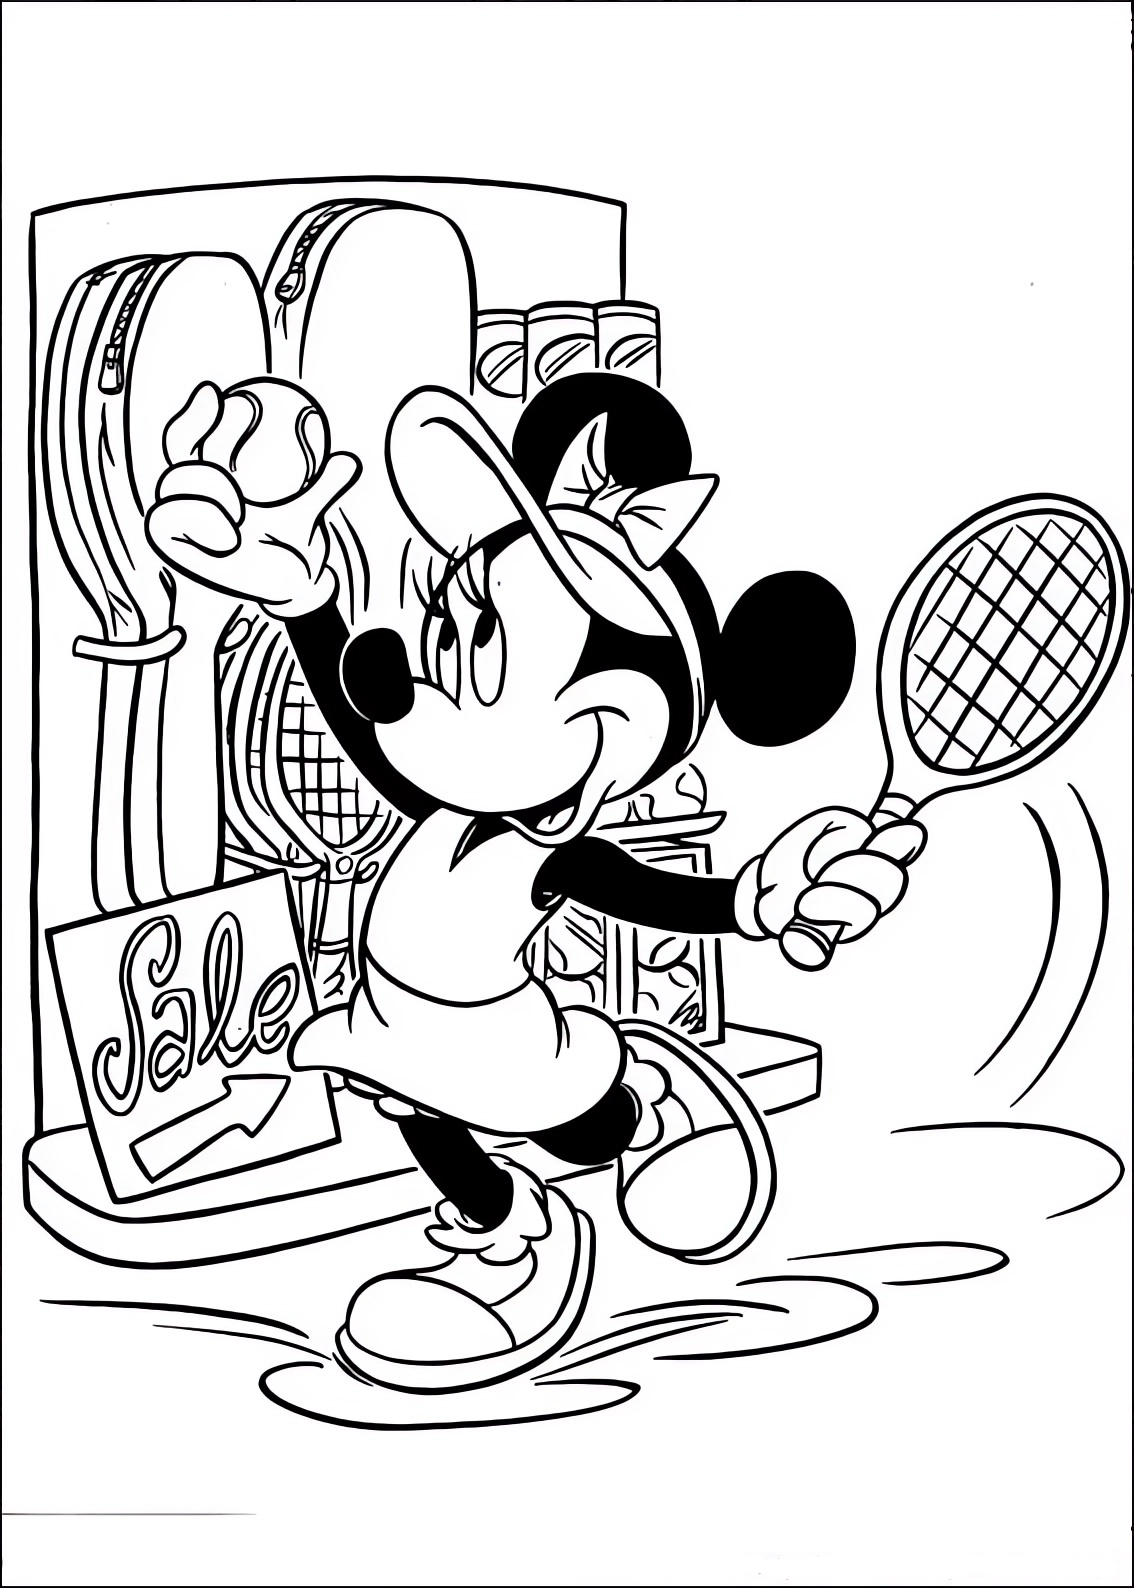 Coloring page of Minnie choosing which tennis racket to buy